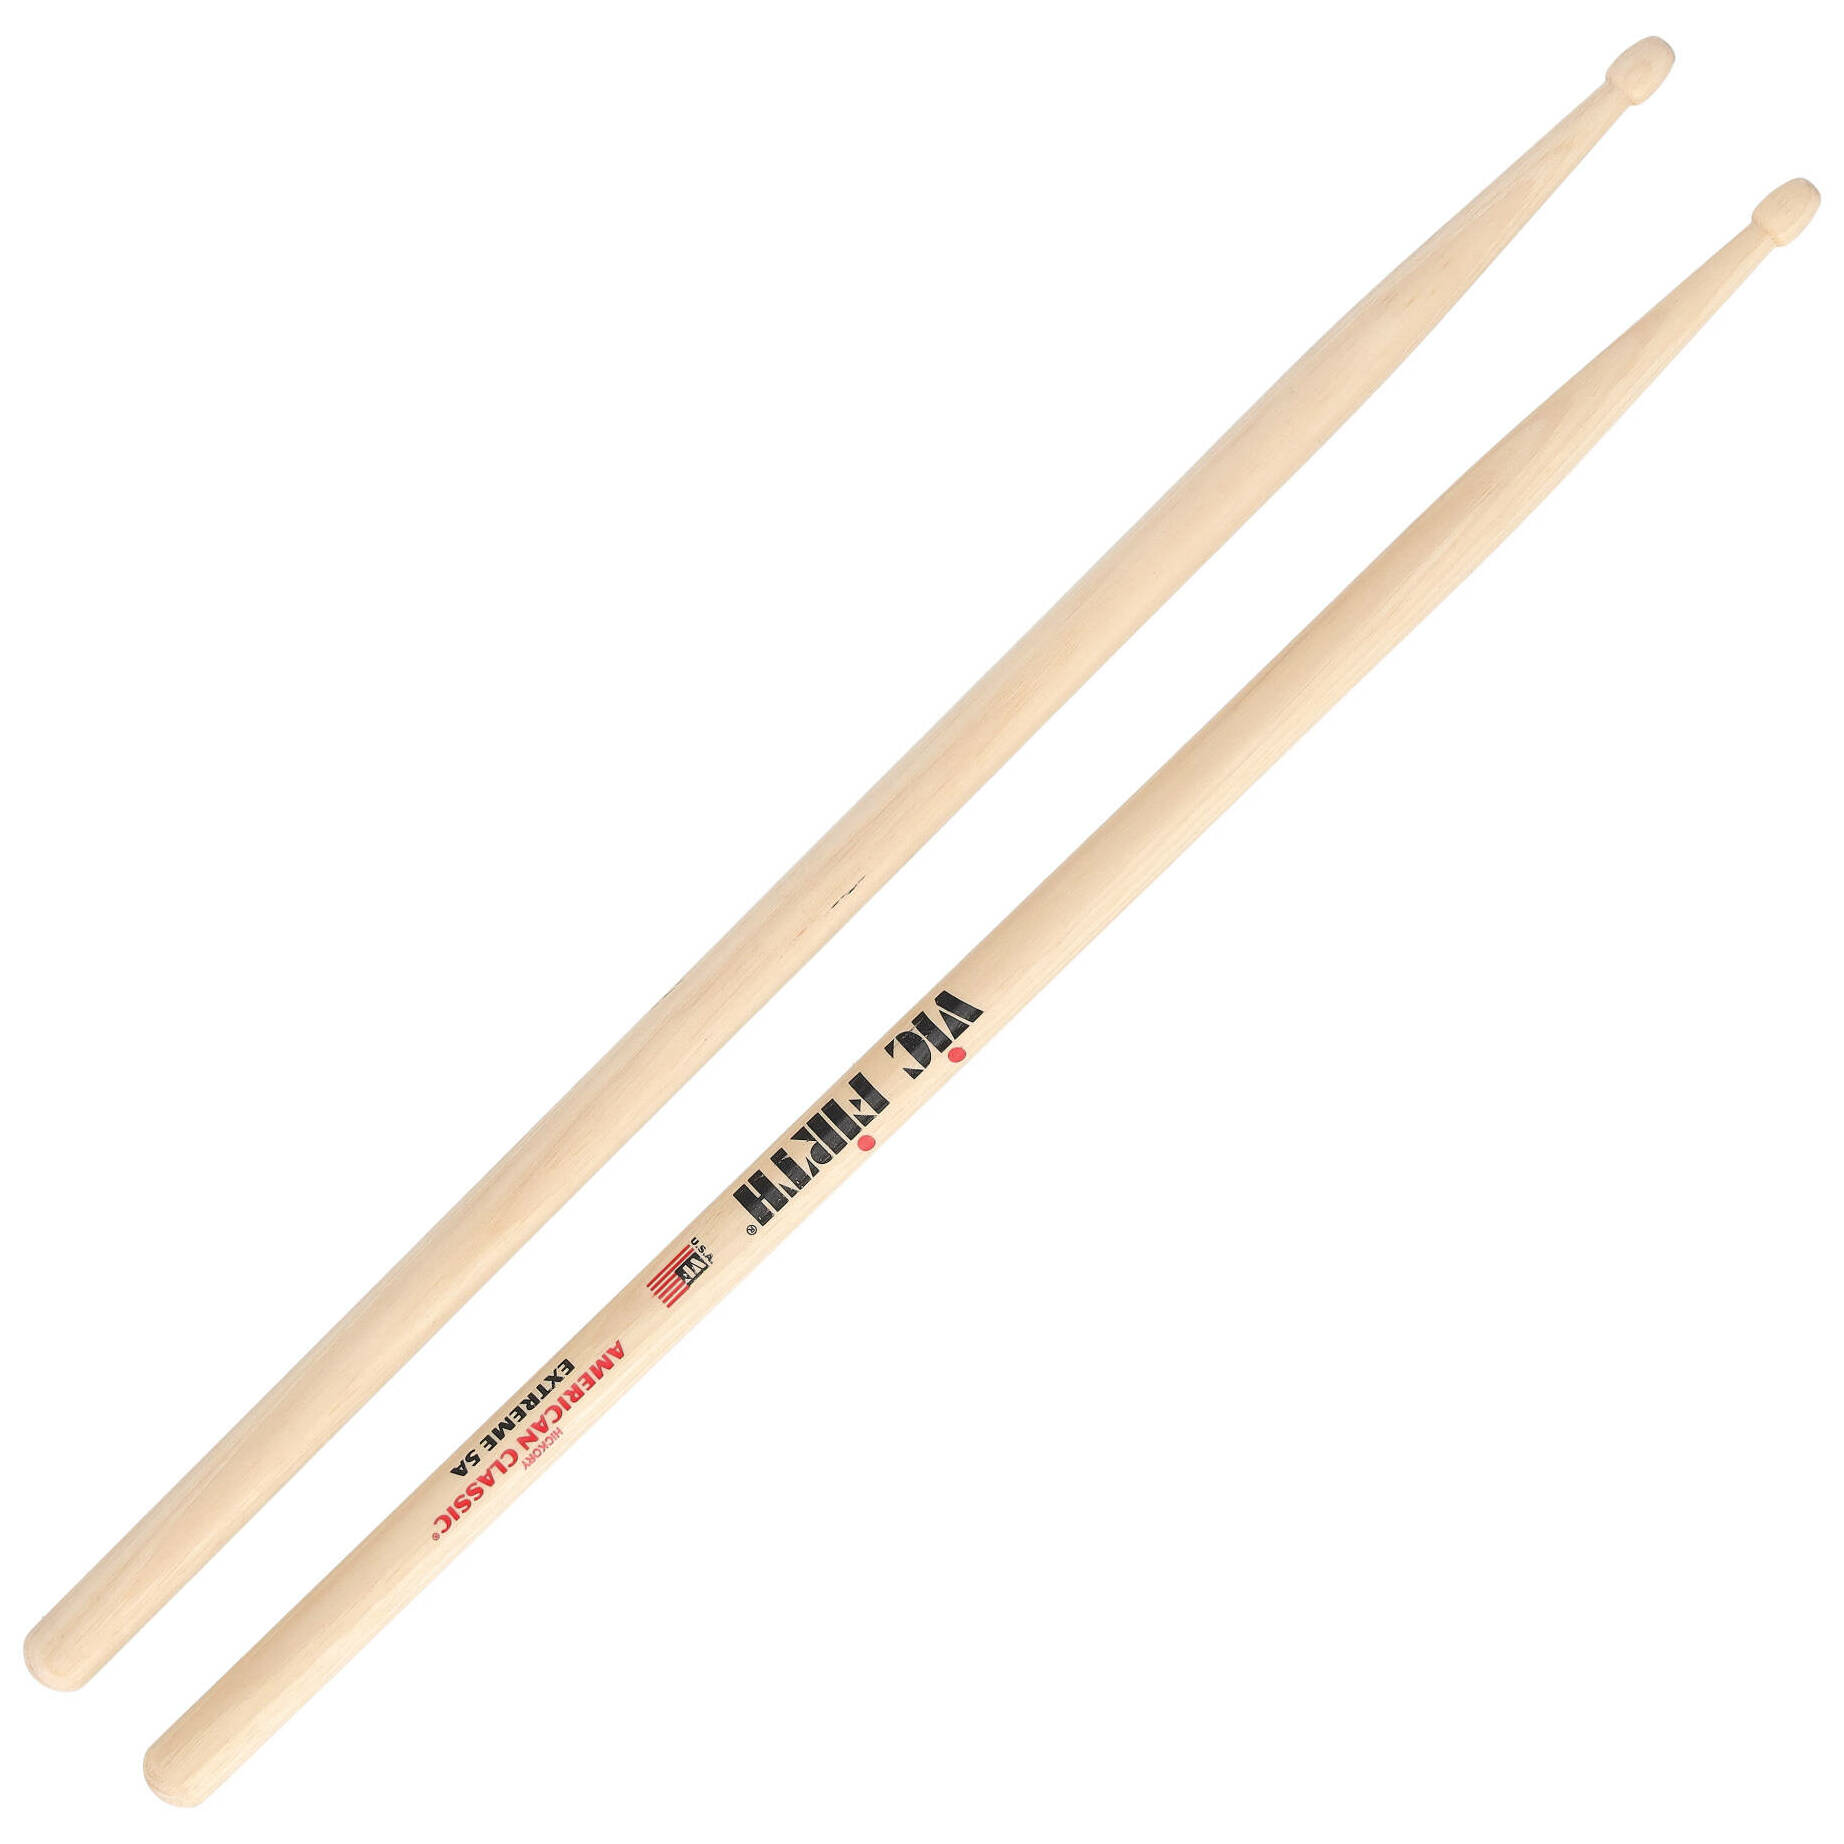 Vic Firth 5A Extreme - American Classic - Hickory - Wood Tip 2